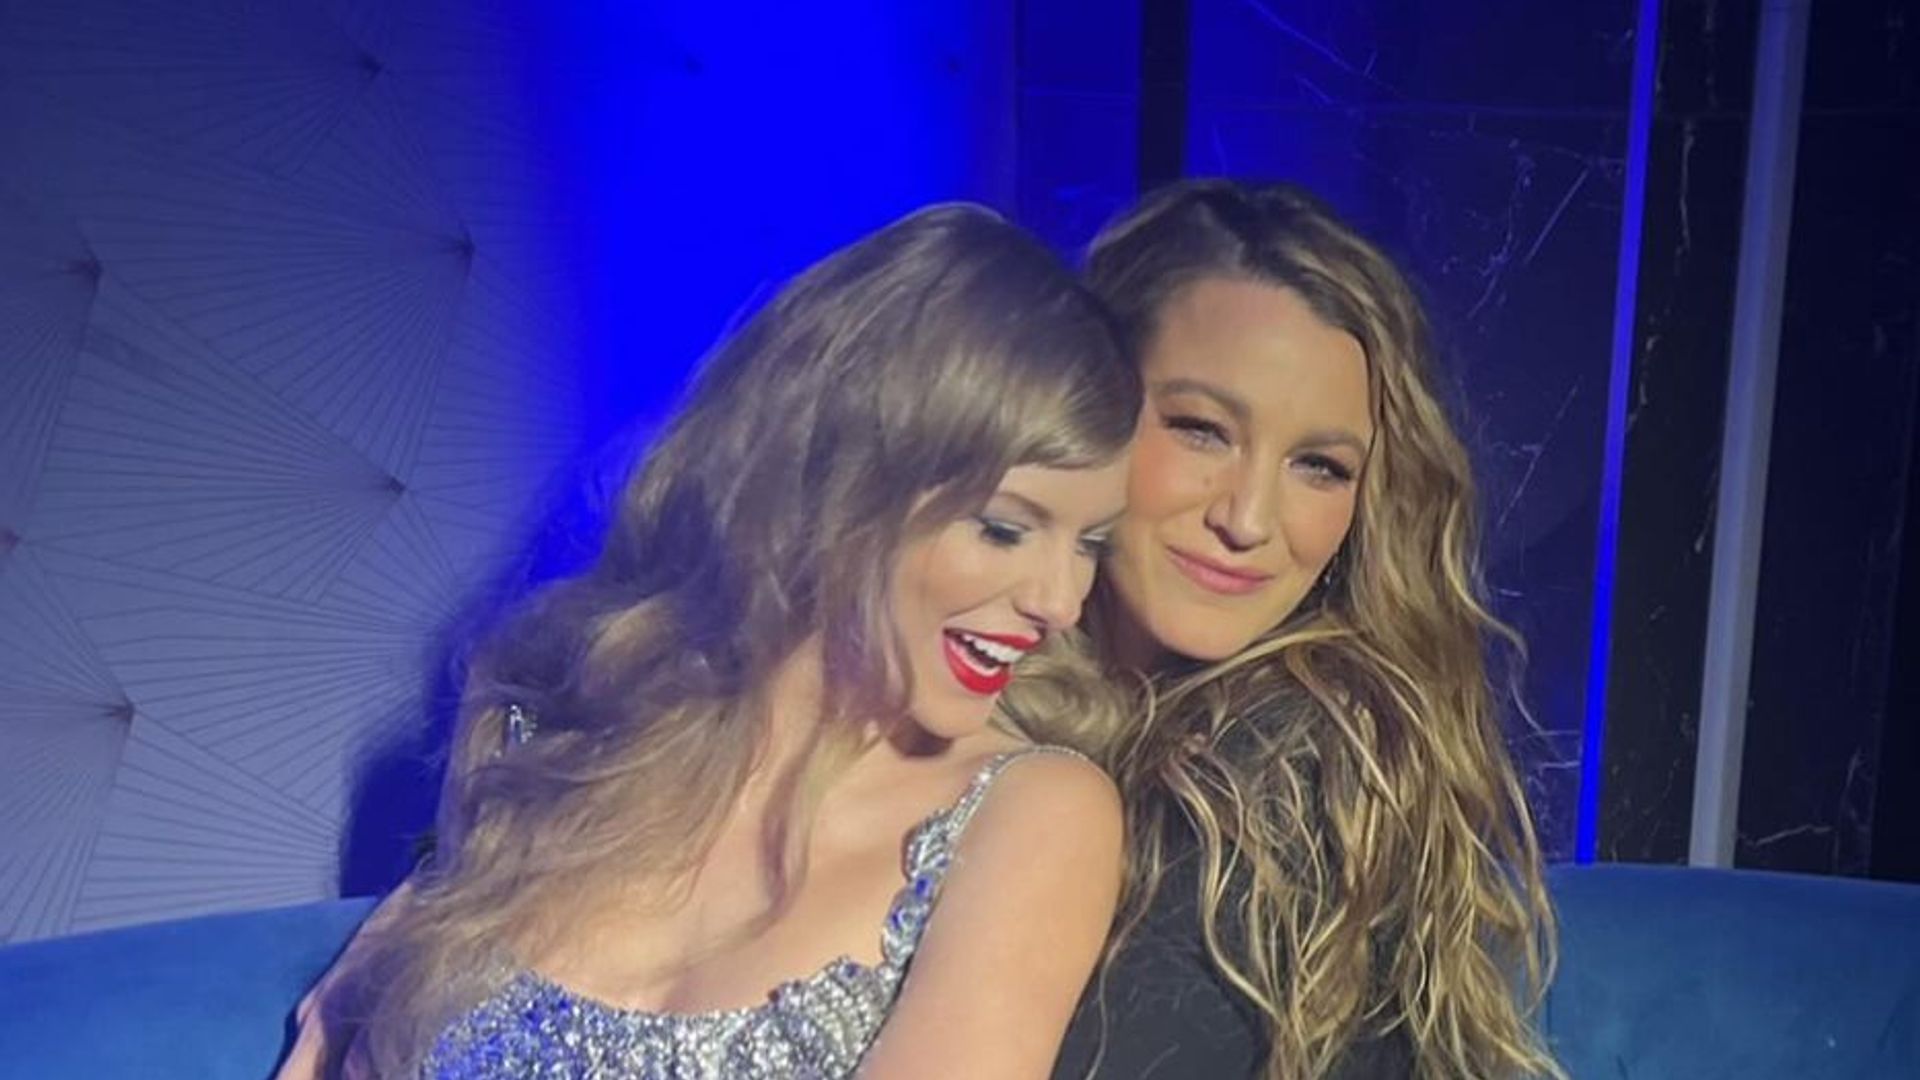 Blake Lively makes rare comment on friendship with best friend Taylor Swift as pair party in London